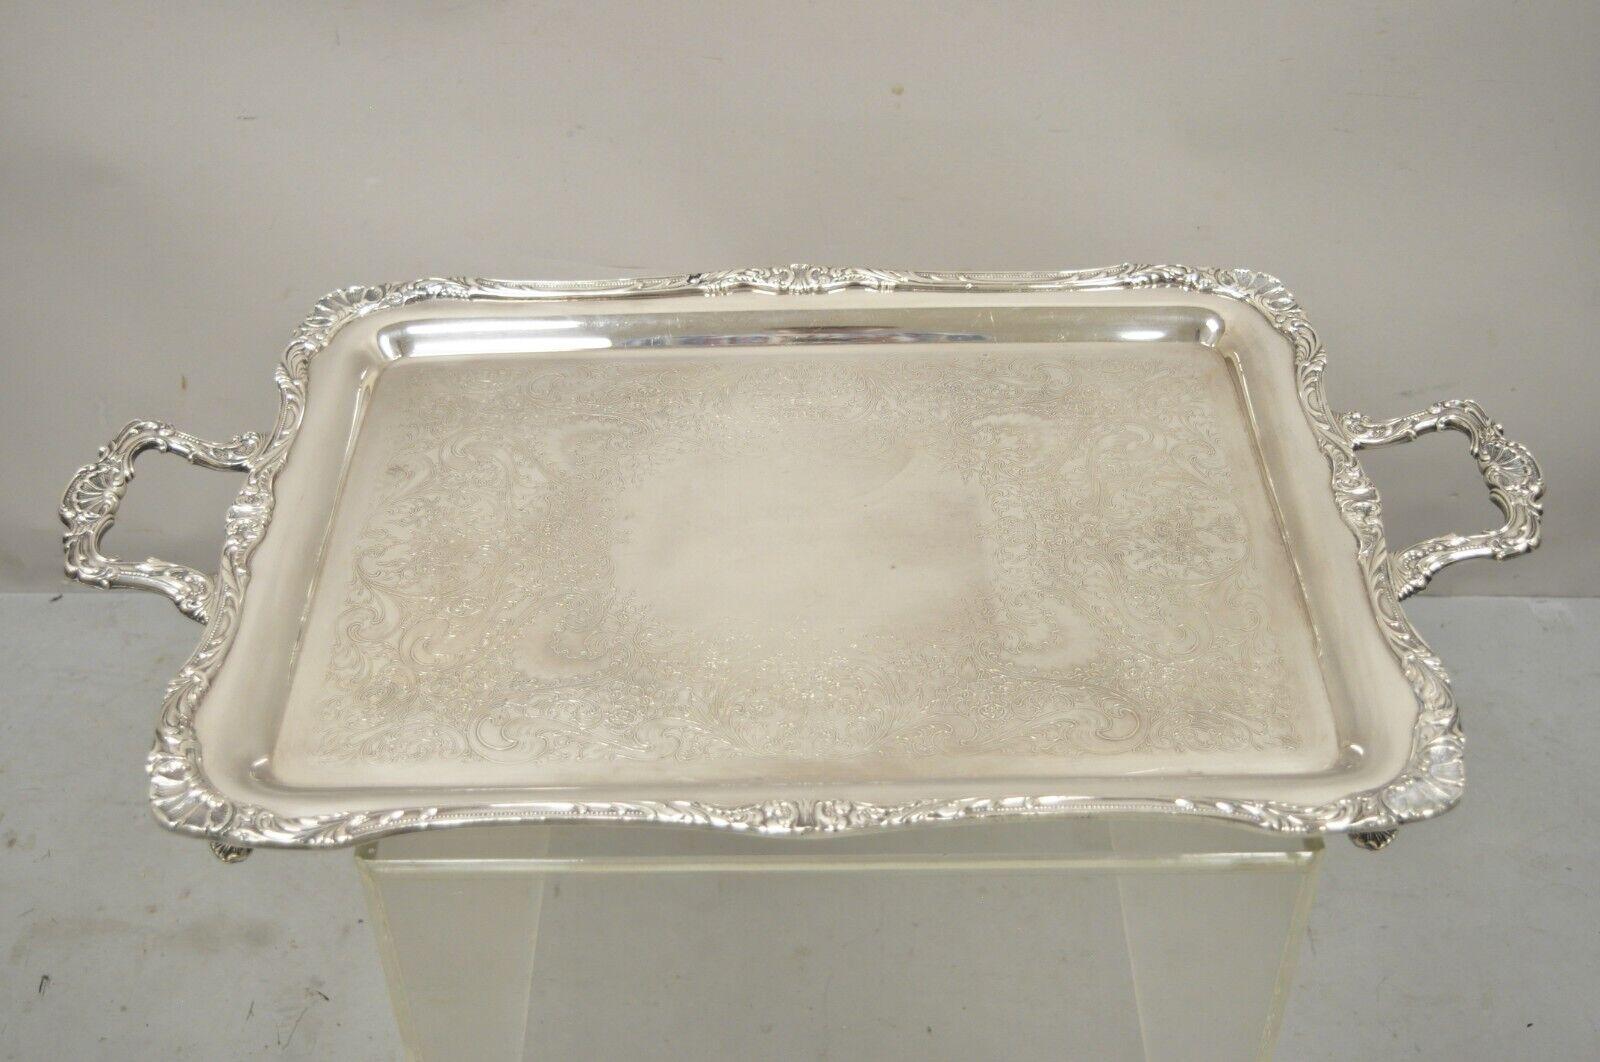 20th Century WM Rogers & Sons Spring Flowers 2092 Silver Plated Platter Serving Tray For Sale